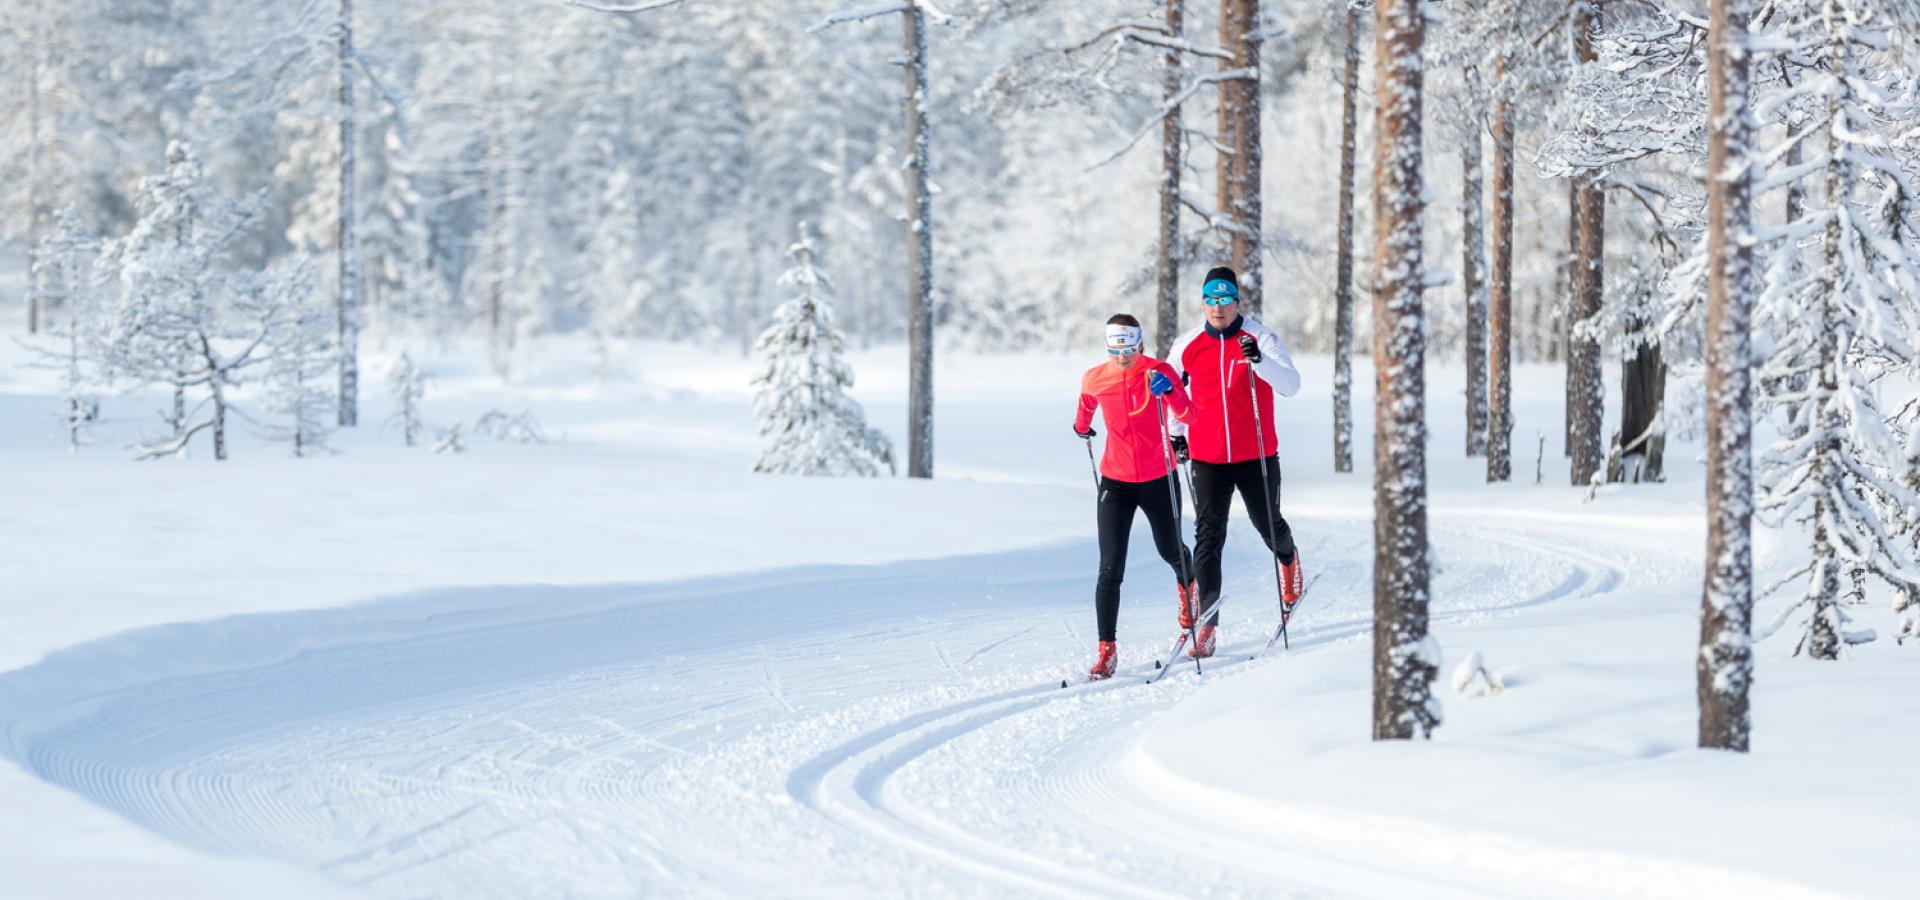 Two people cross-country skiing in a wintry forest.